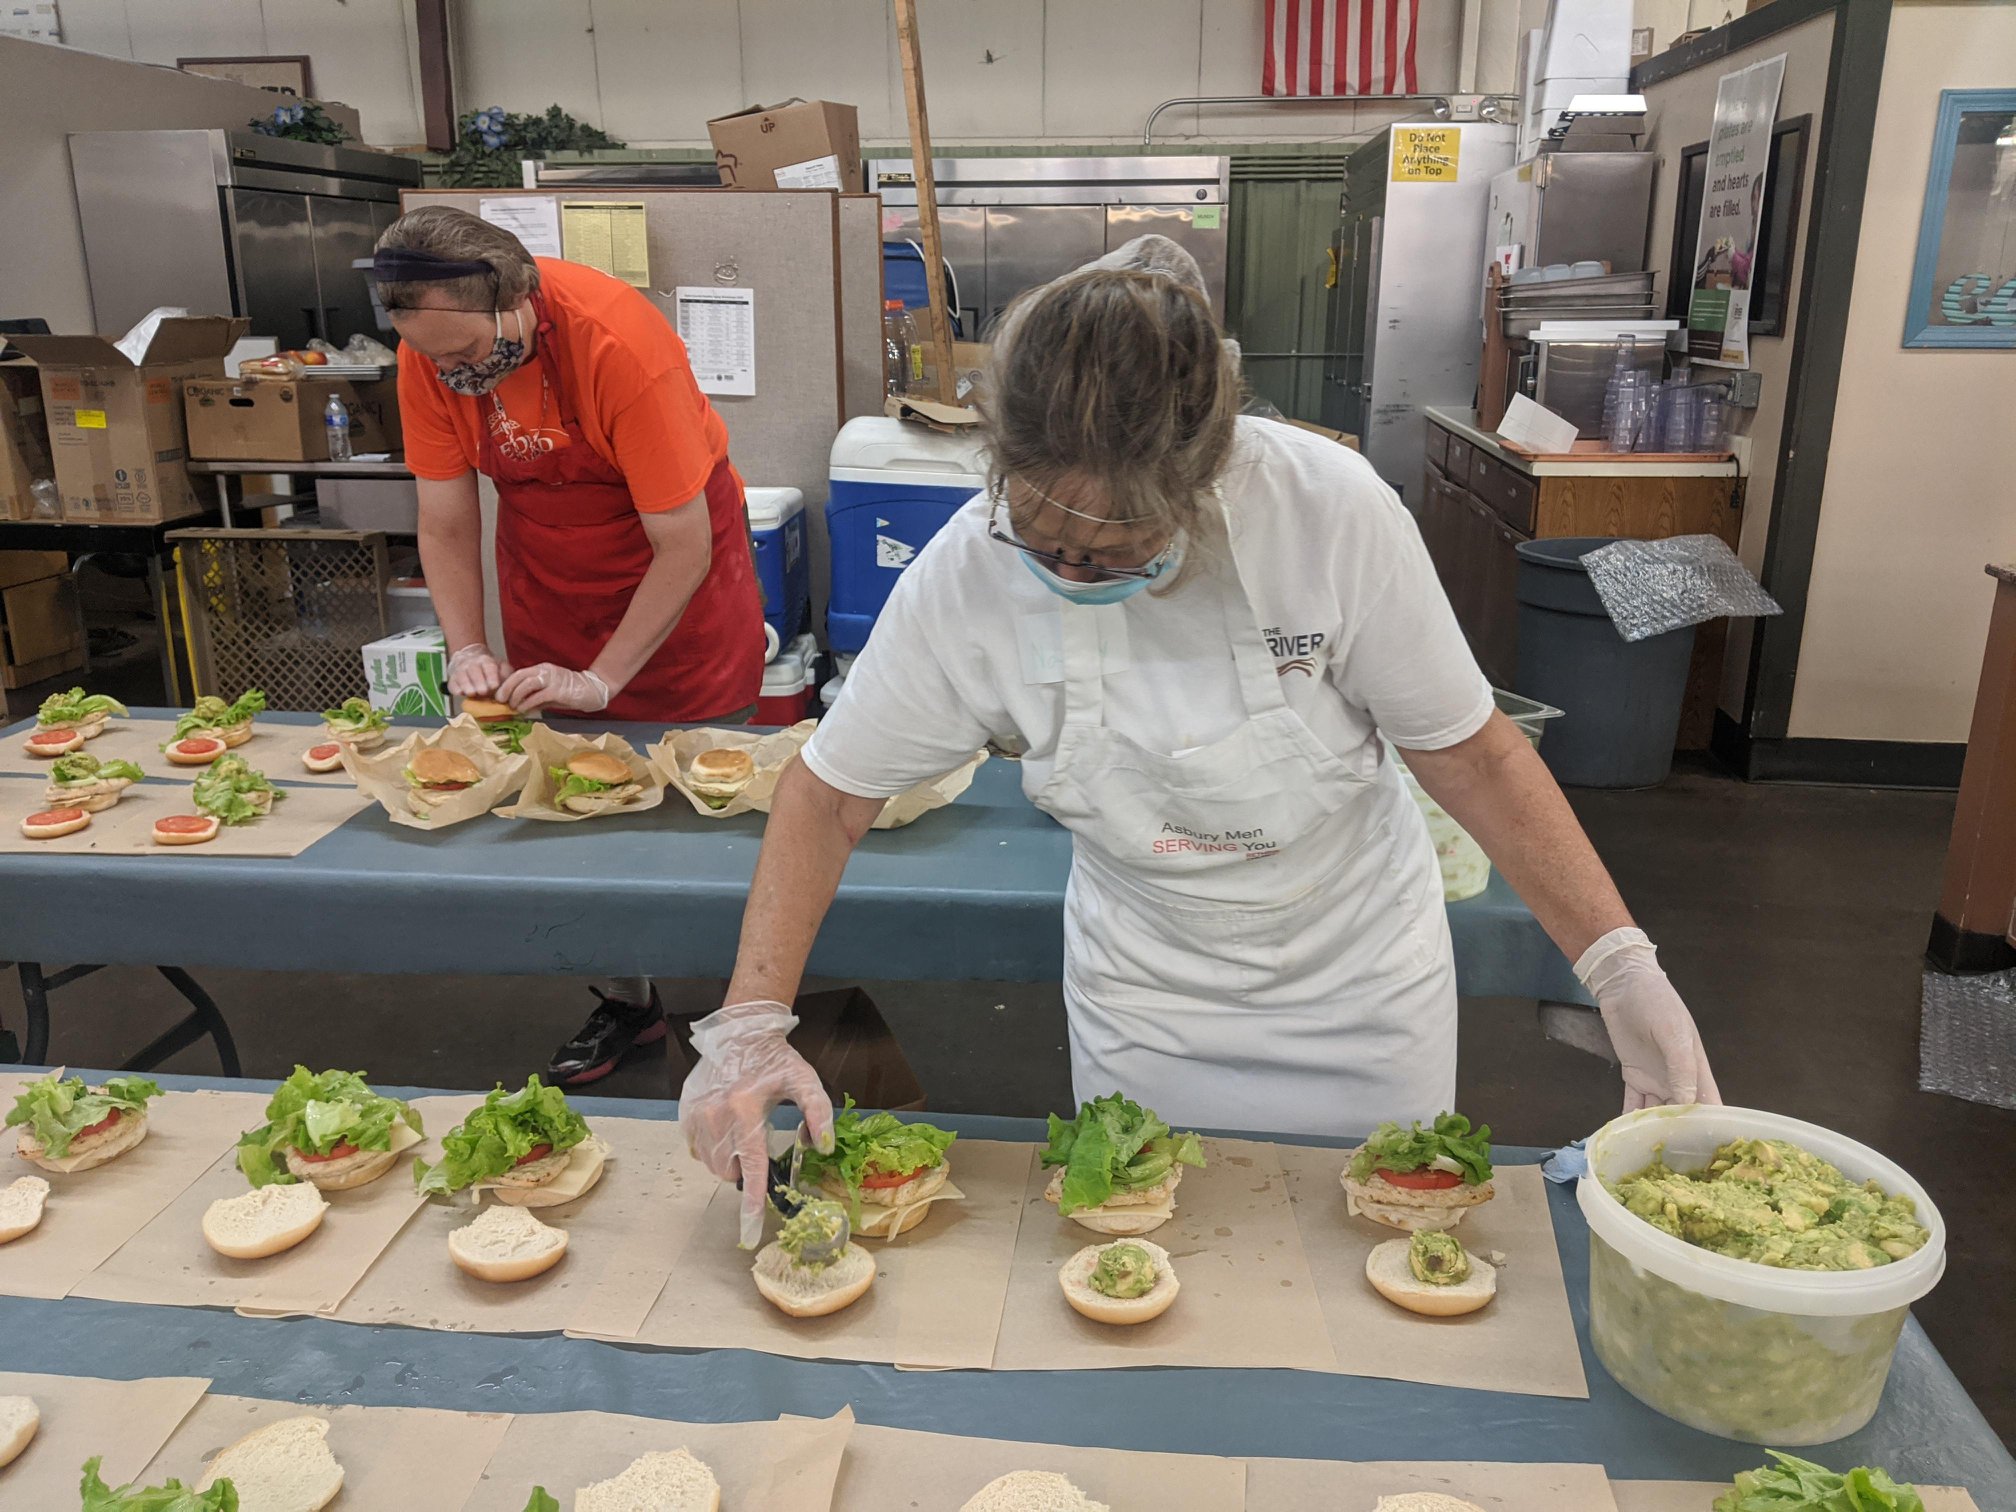 More than 200 ready-to-eat meals are prepared each day using healthy ingredients